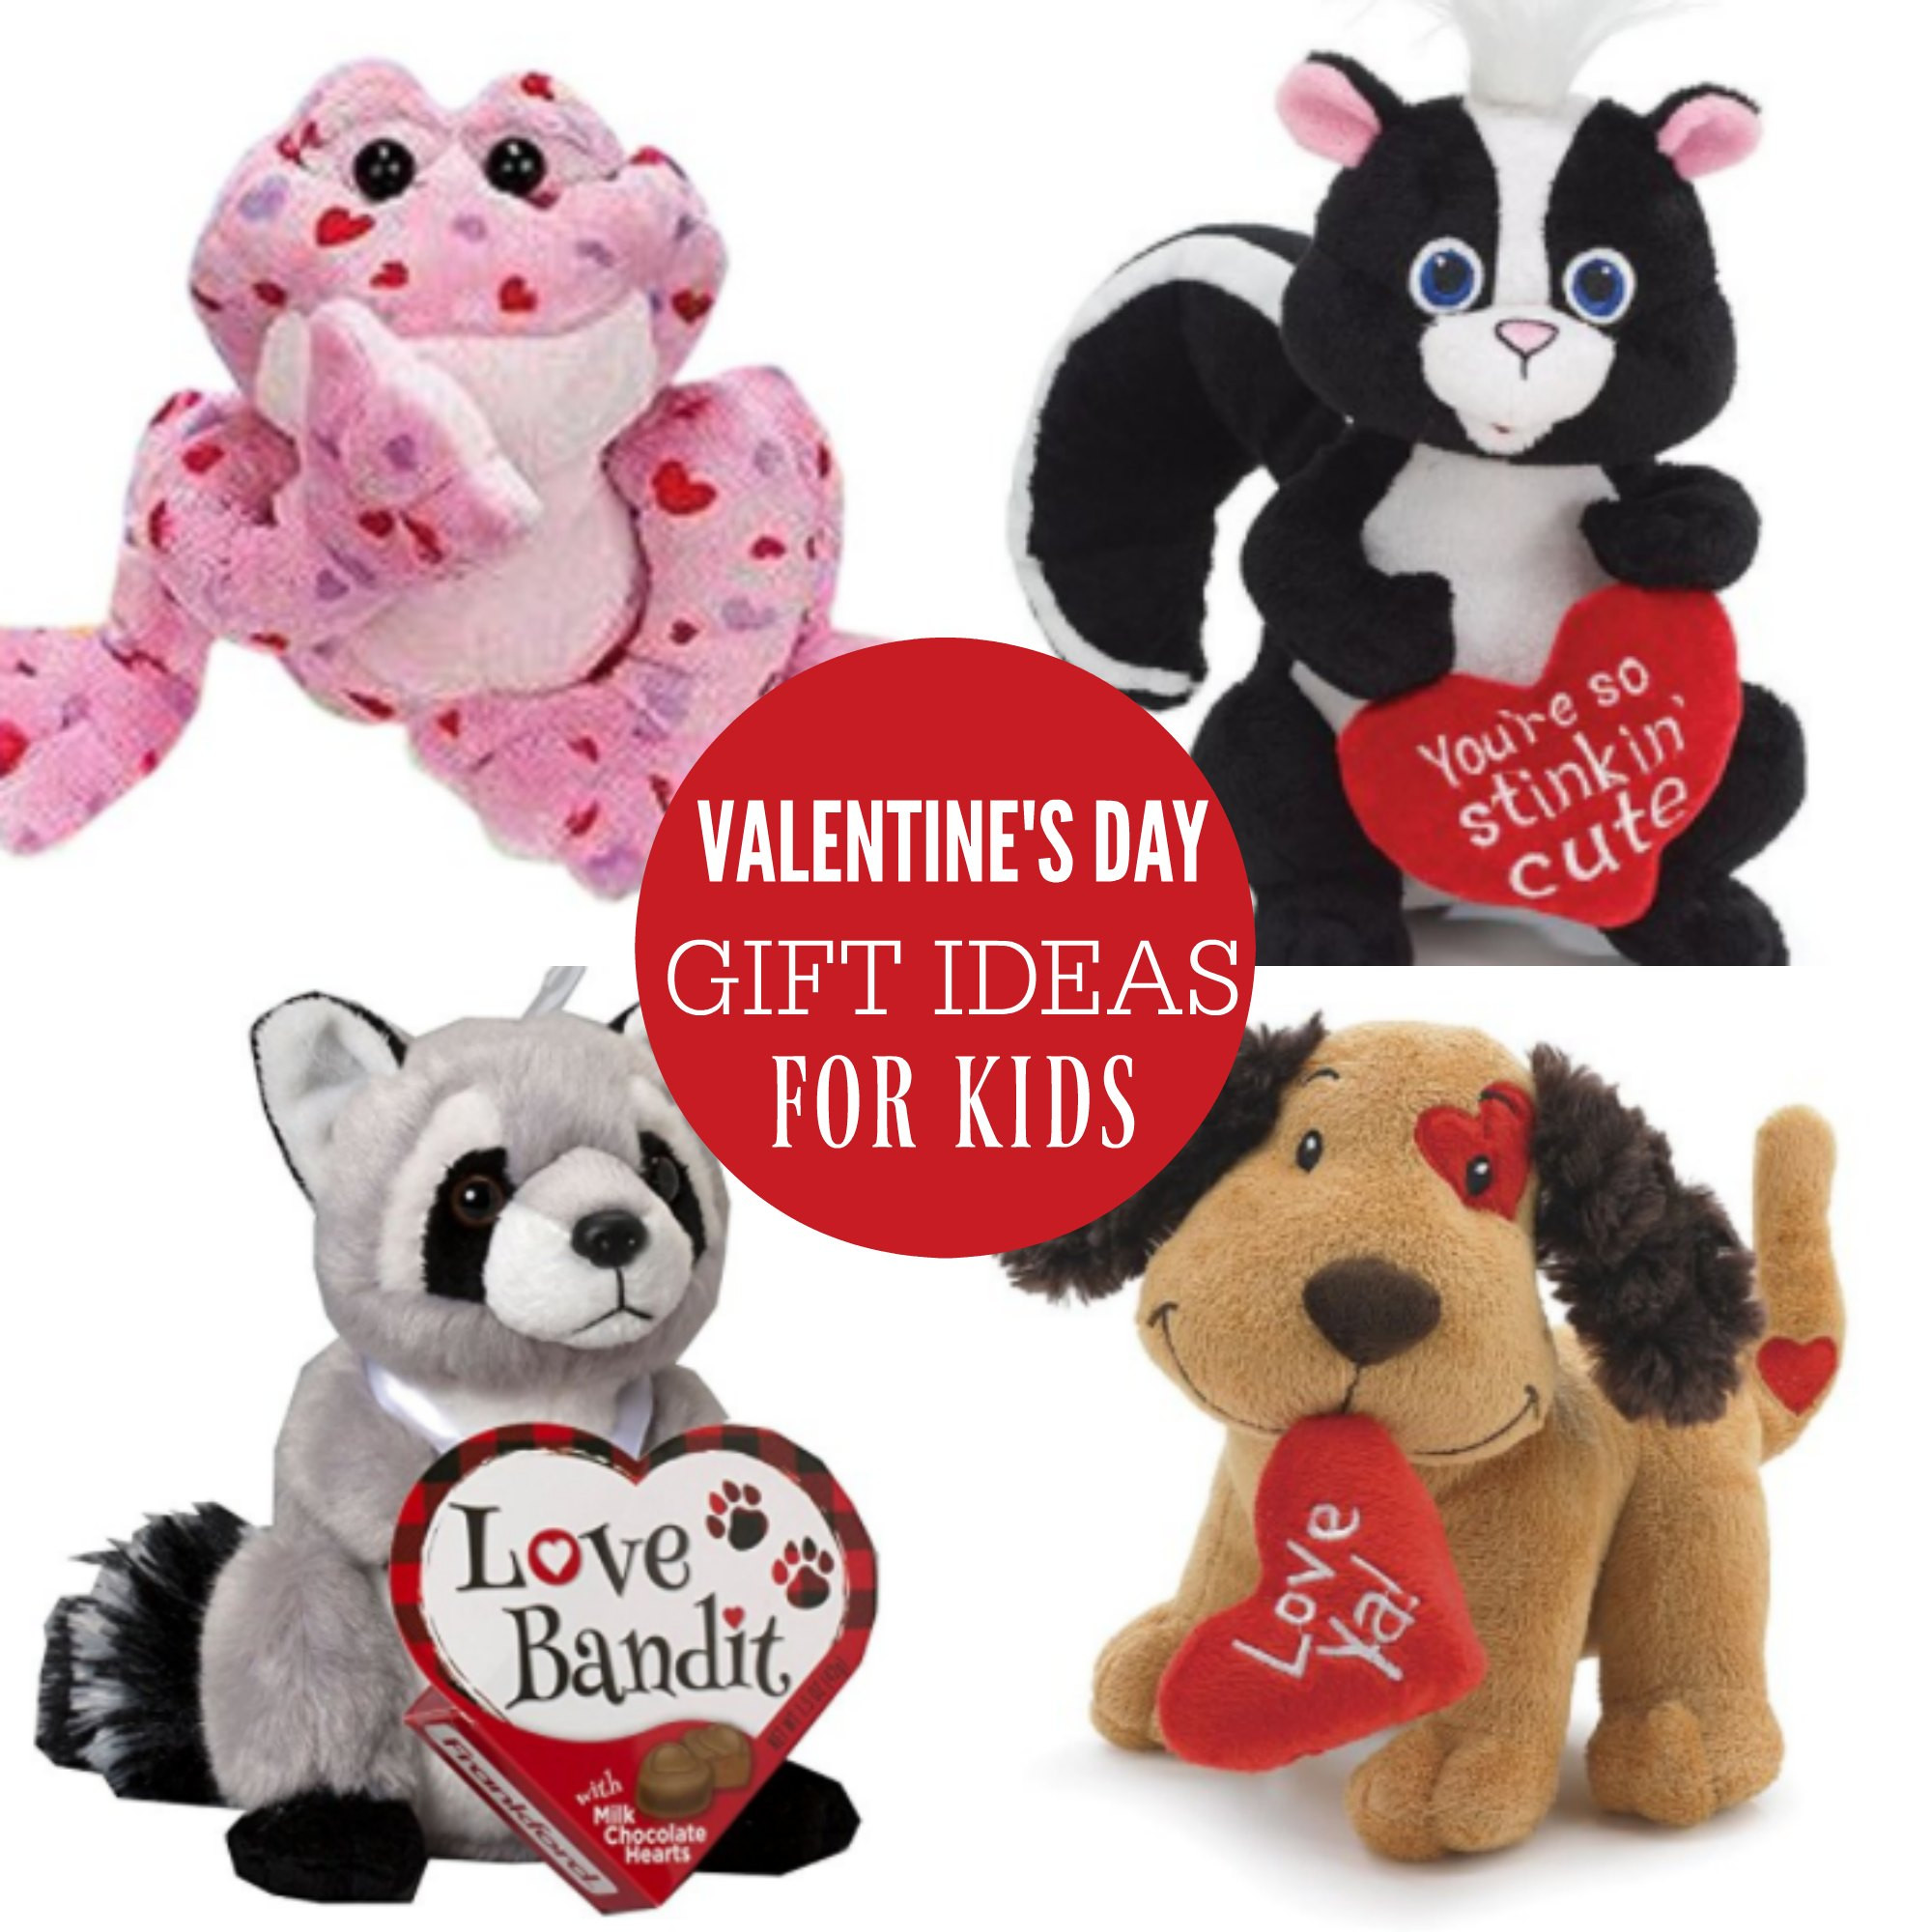 Valentine'S Day Gift Ideas For Kids
 Valentine Gift ideas for Kids That they will love e